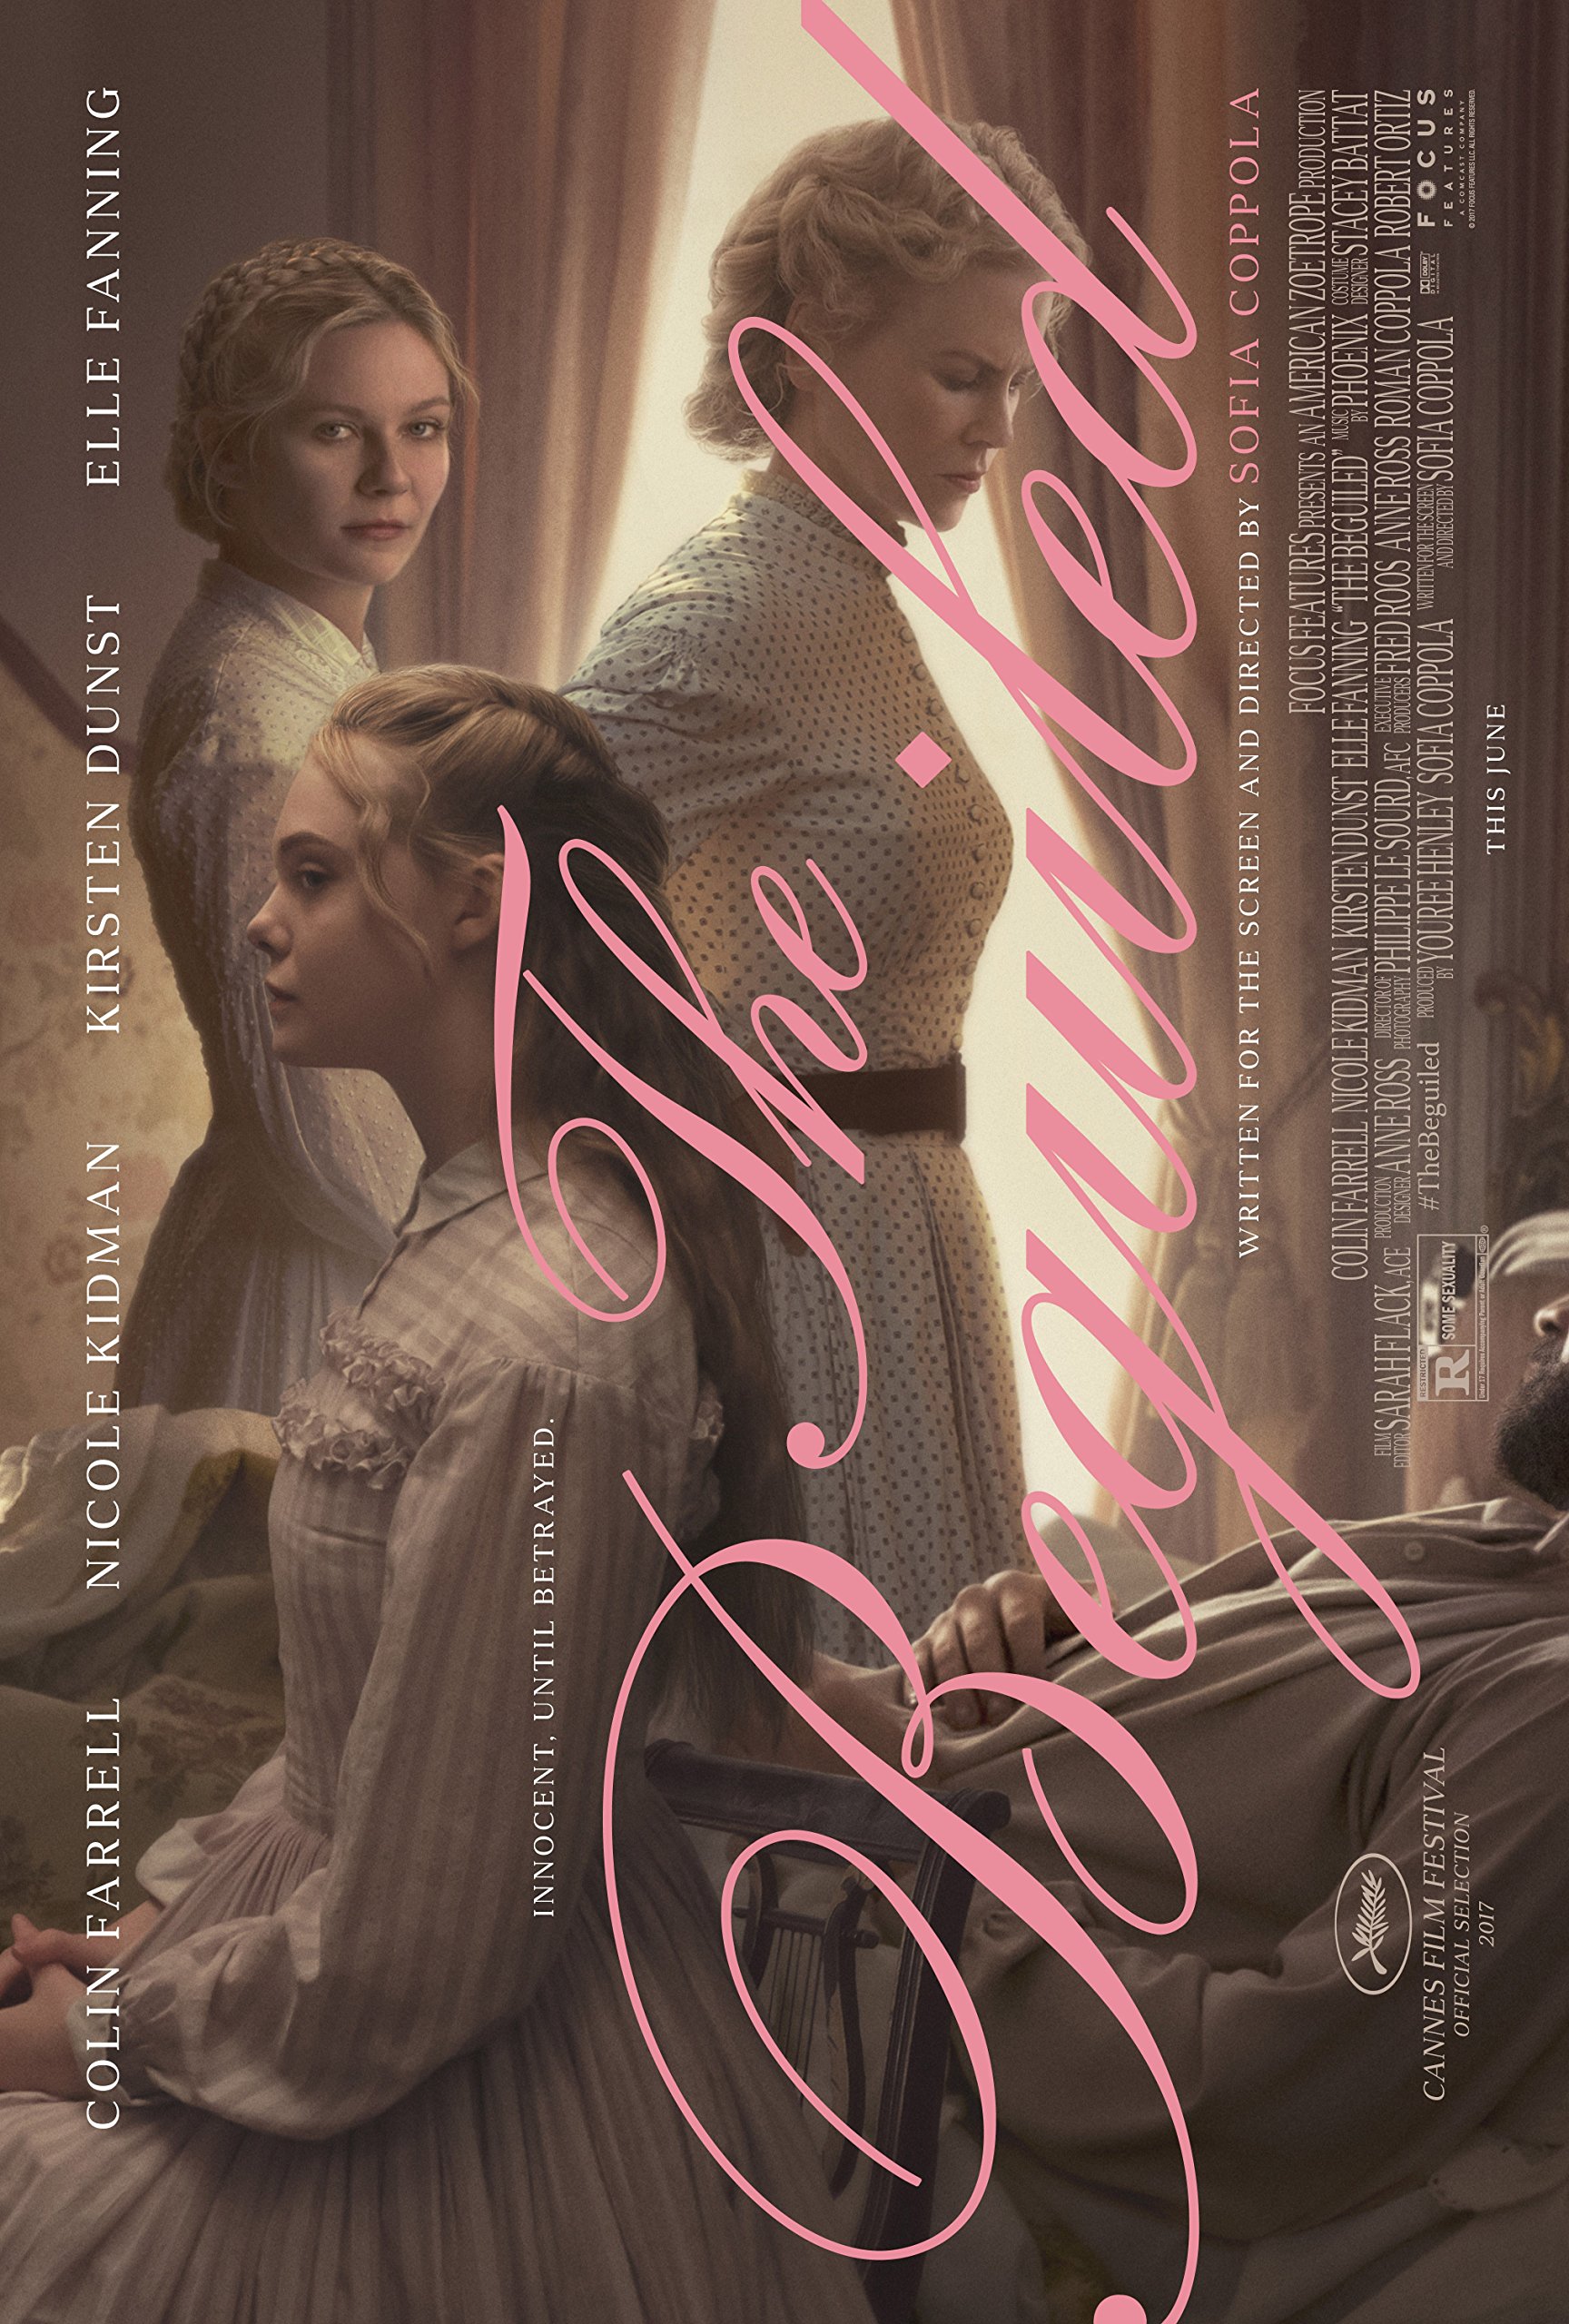 the-beguiled-movie-purchase-or-watch-online